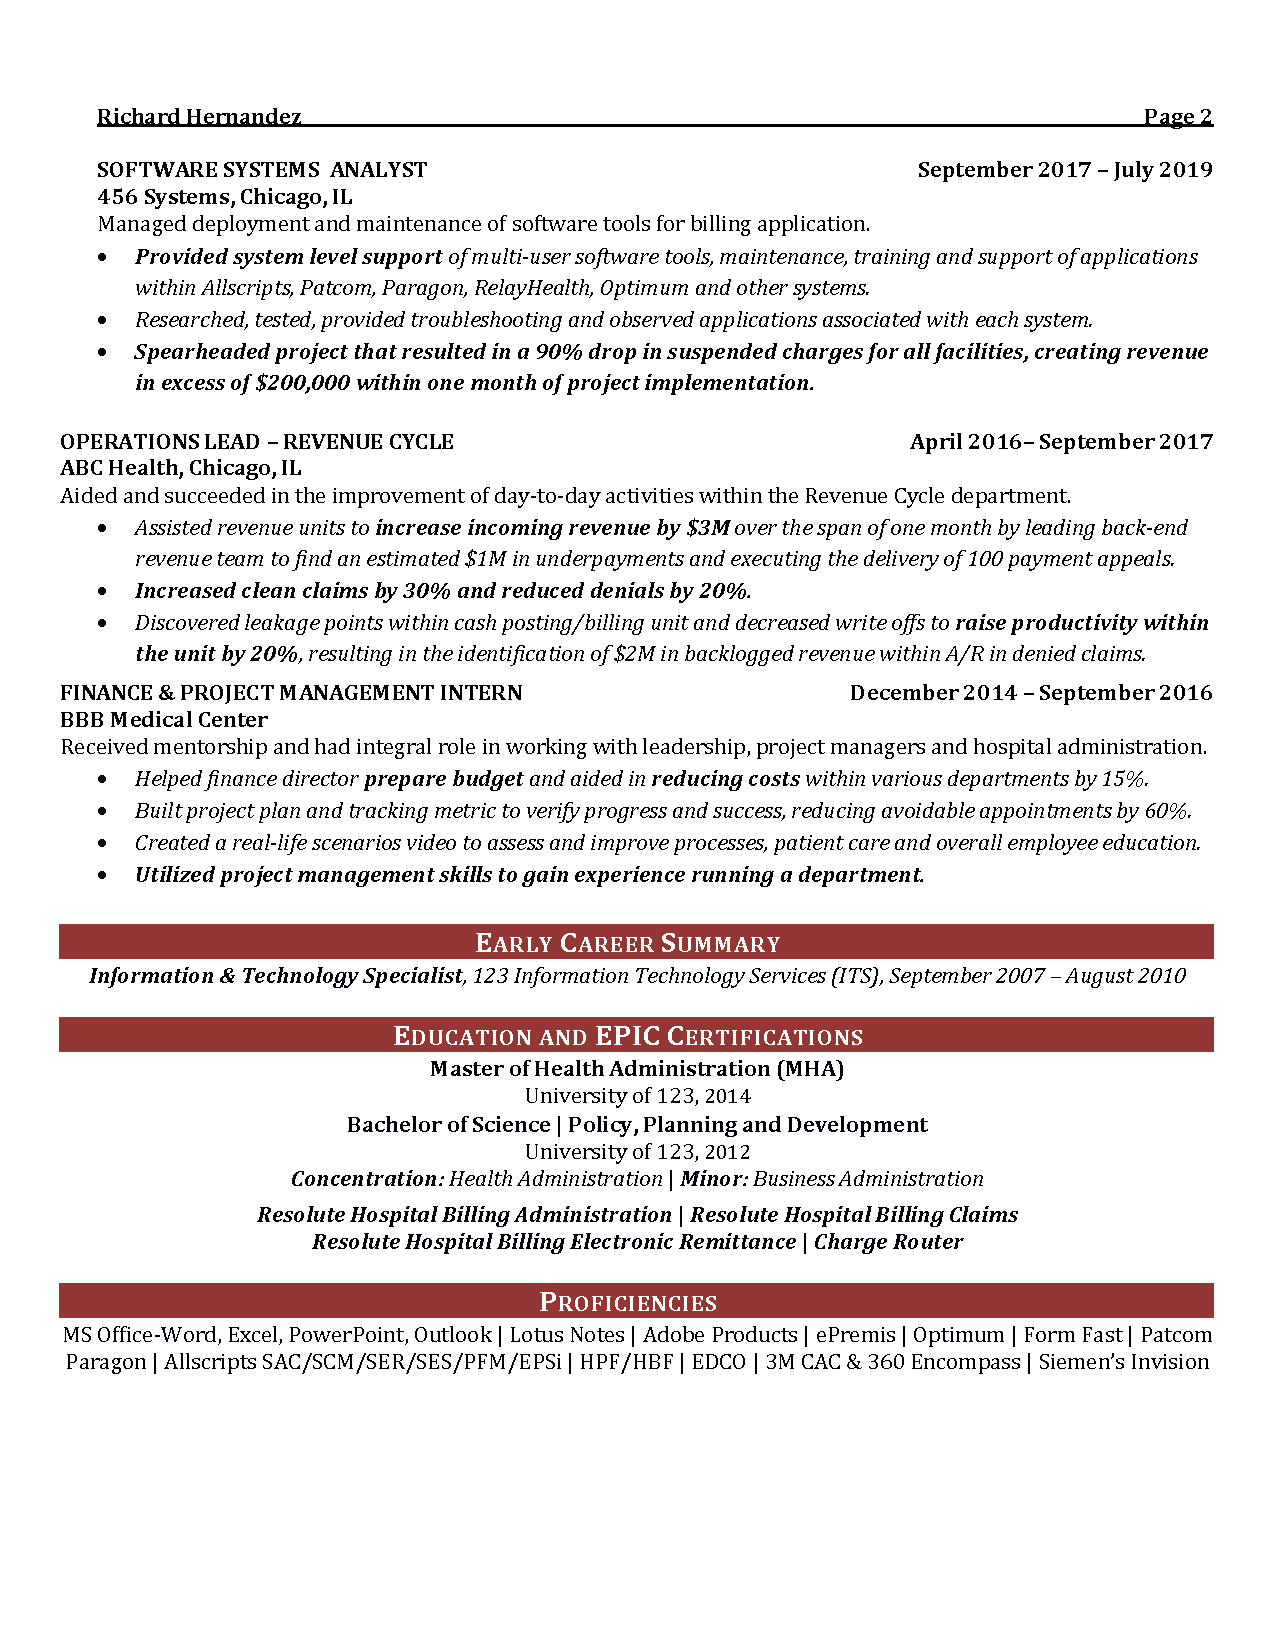 00009 systems analyst resume example Page 2